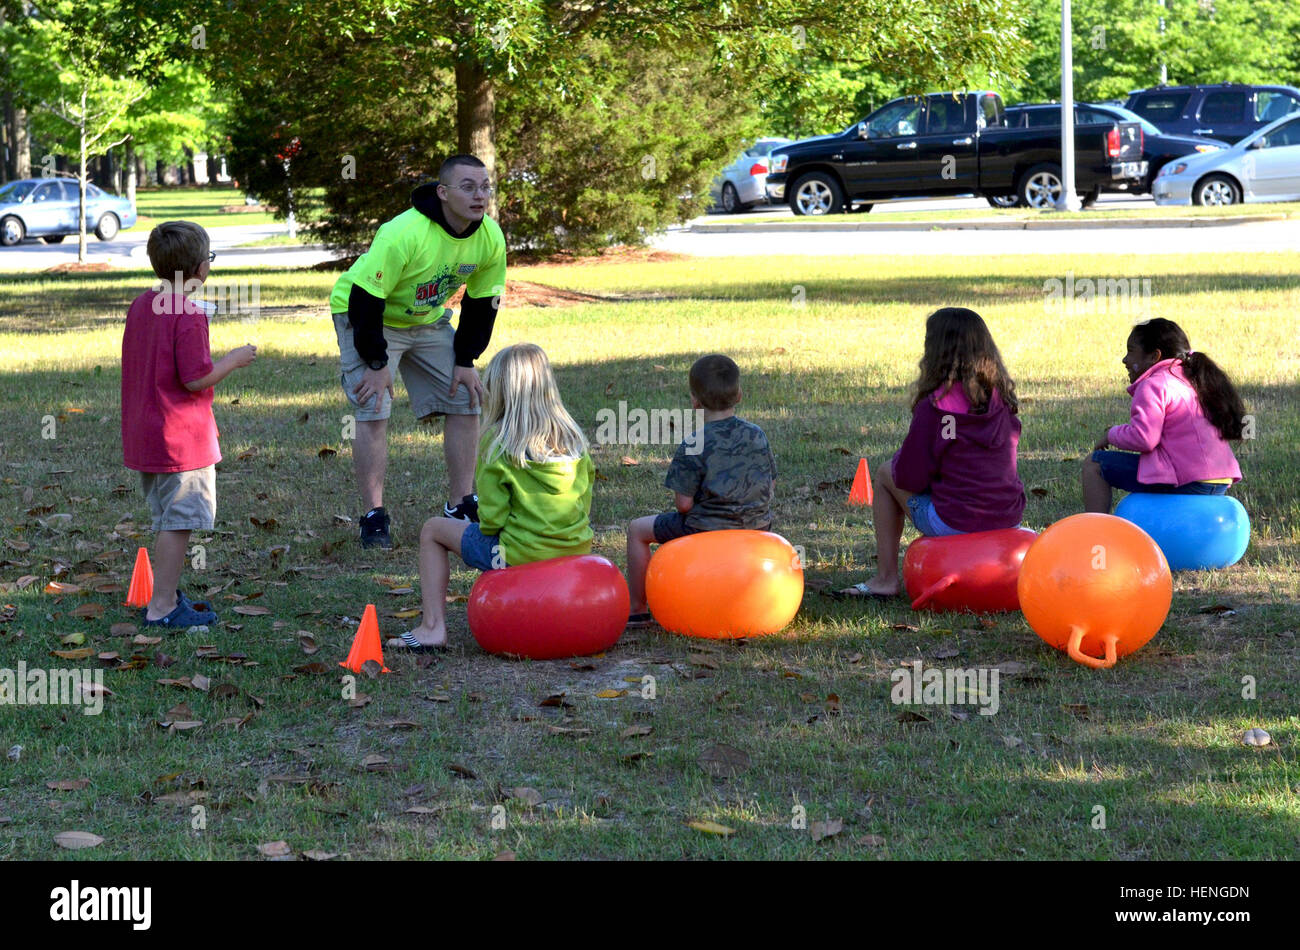 Pfc. Keegan Clark, volunteer, 108th Military Police Company, 503rd Military Police Battalion, 16th Military Police Brigade, prepares the children for their own race using hopper balls at the United Service Organizations' (USO) Run for the Troops 5k, May 17 at Methodist University. The race brought over 200 participants from the military and civilian community together for a common cause, to support the troops. The money raised from this event benefits the Fort Bragg and Fayetteville Regional Airport USO centers. (U.S. Army photo by Sgt. Amie J. McMillan, 10th Press Camp Headquarters) USO Run f Stock Photo